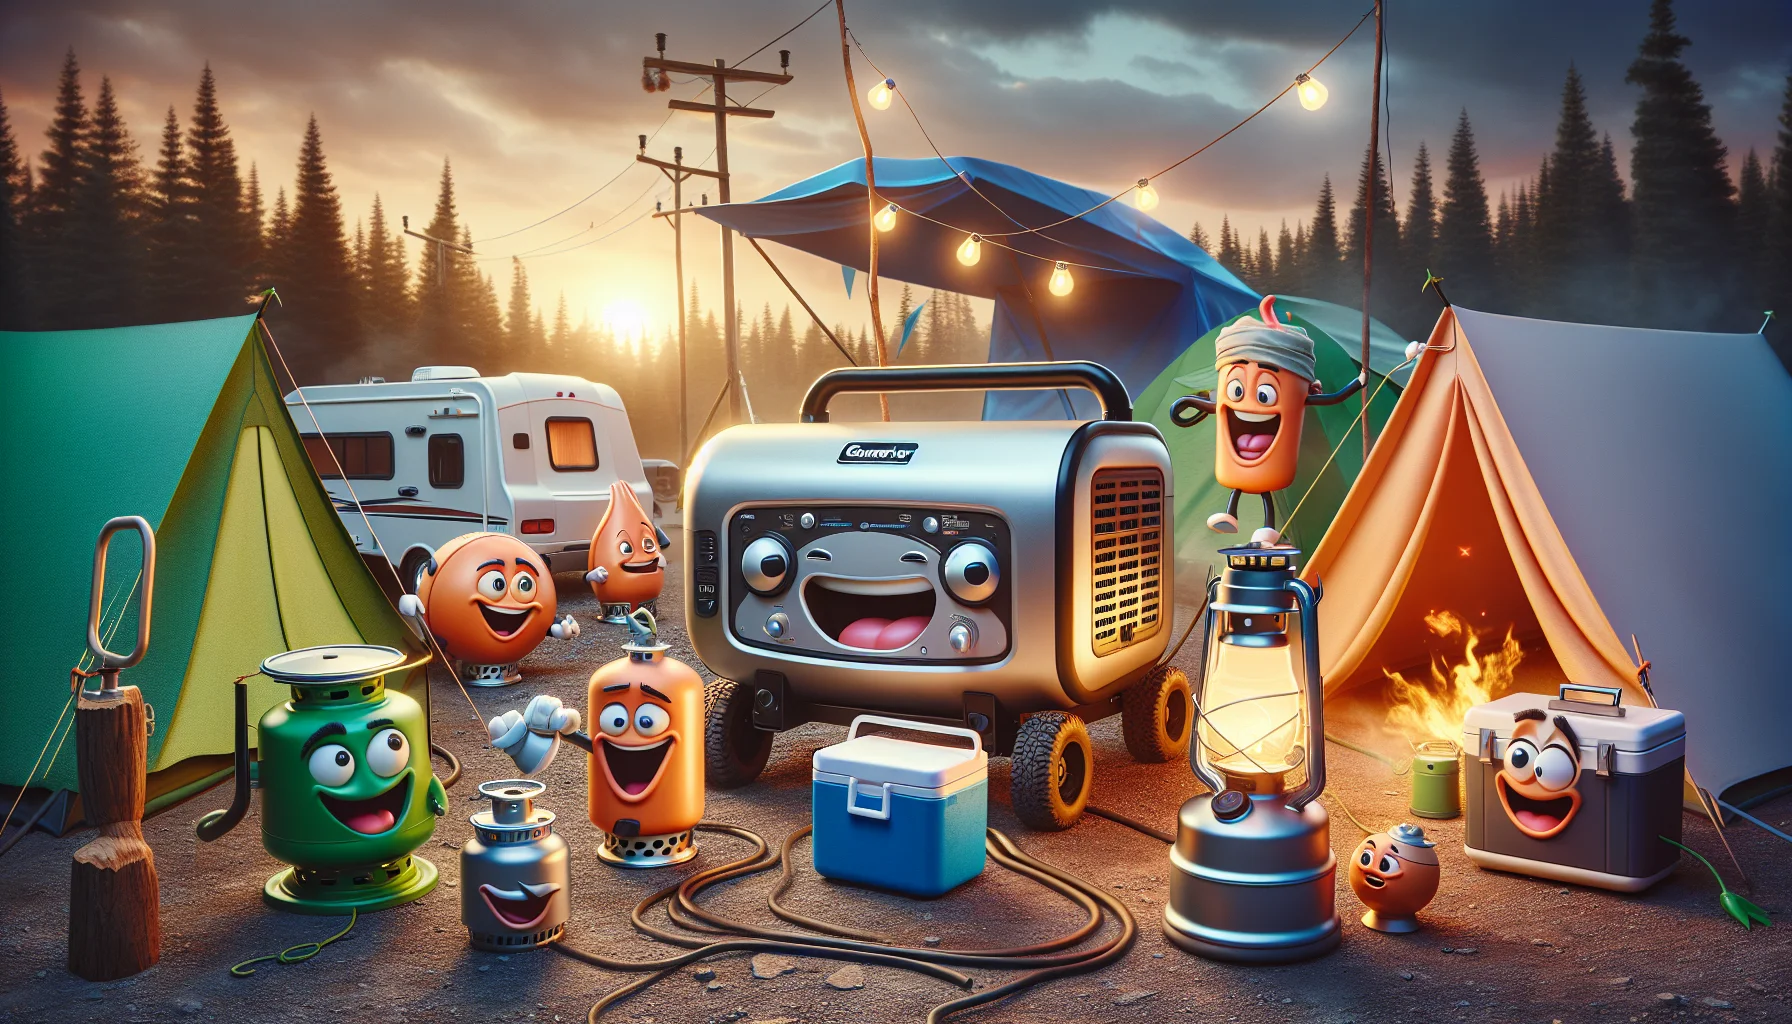 Picture a whimsical scene featuring a propane RV generator in a surreal campsite setting. The generator, donning a playful, animated face, is jubilantly producing streams of electricity. Nearby, a group of anthropomorphized common camping items, including a tent, cooler, and lantern of varied gender and descent, look on in astonishment. The lantern, cooler, and tent are laughing and cheering, their faces glowing, inciting people to generate power. The setting sun illuminates the scene, casting a warm, golden hue on everything.